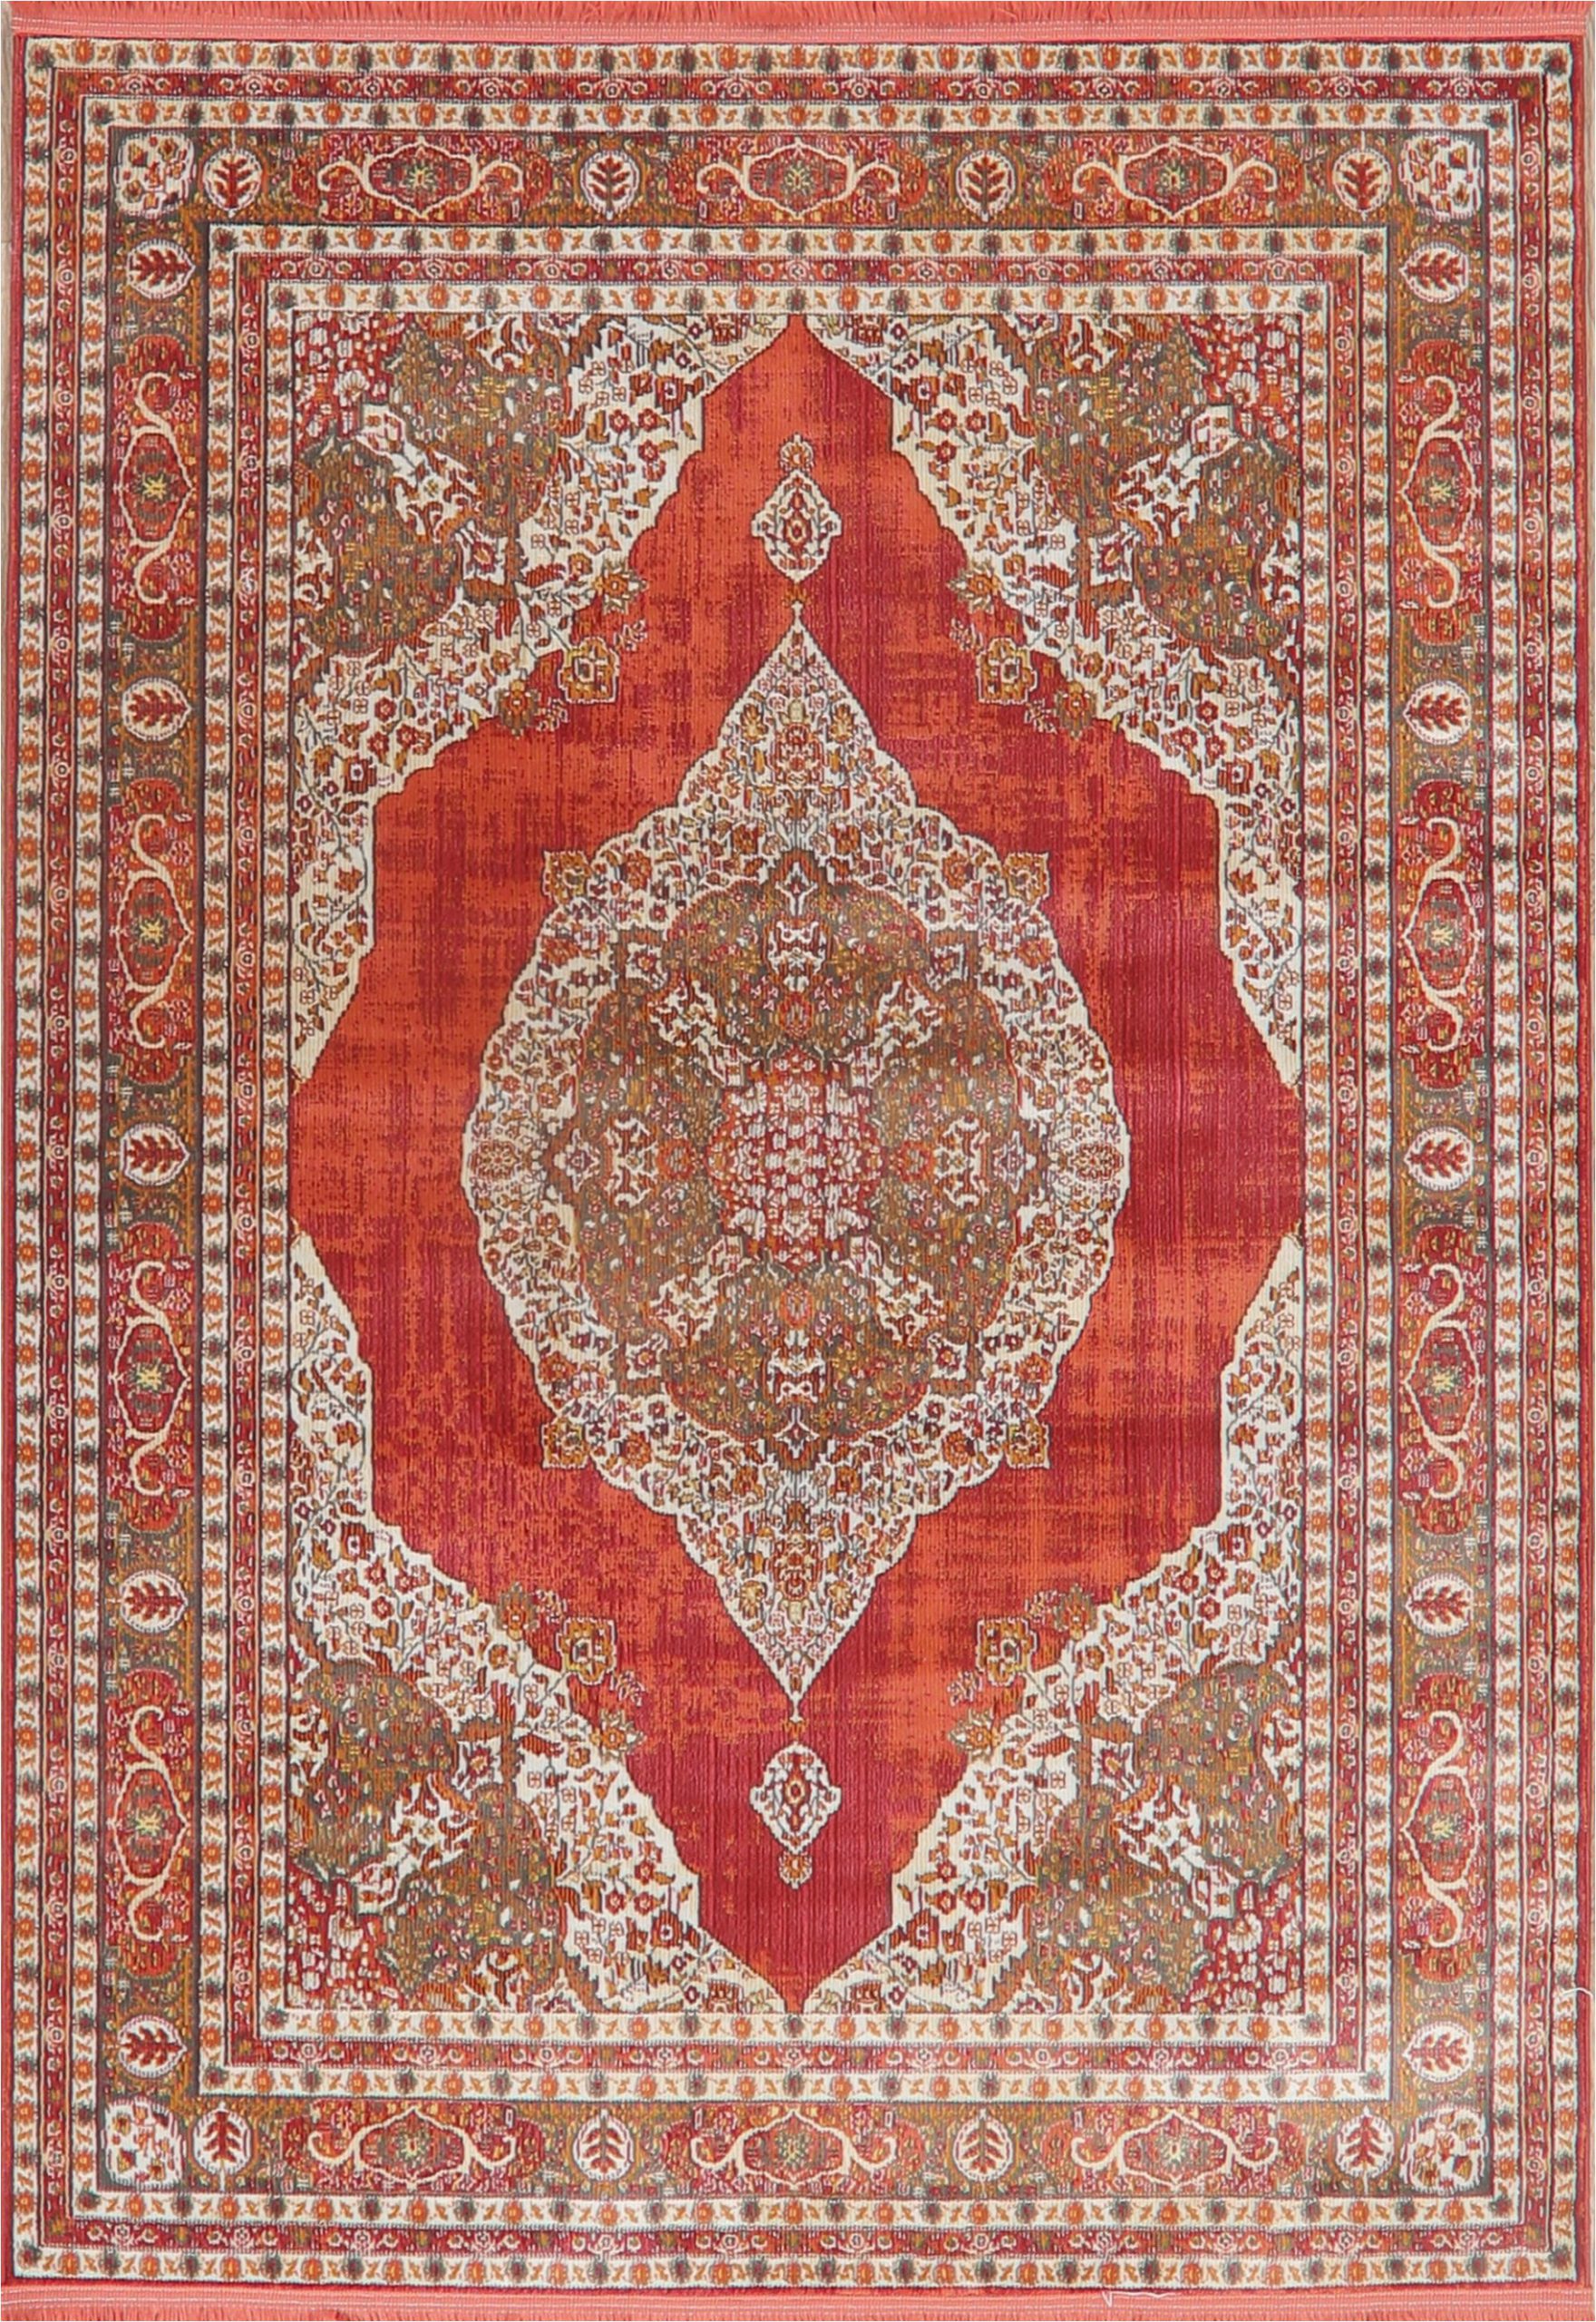 Red and Brown area Rugs Walmart Floral Medallion Distressed Turkish oriental area Rugs Living Room Red Carpet Walmart